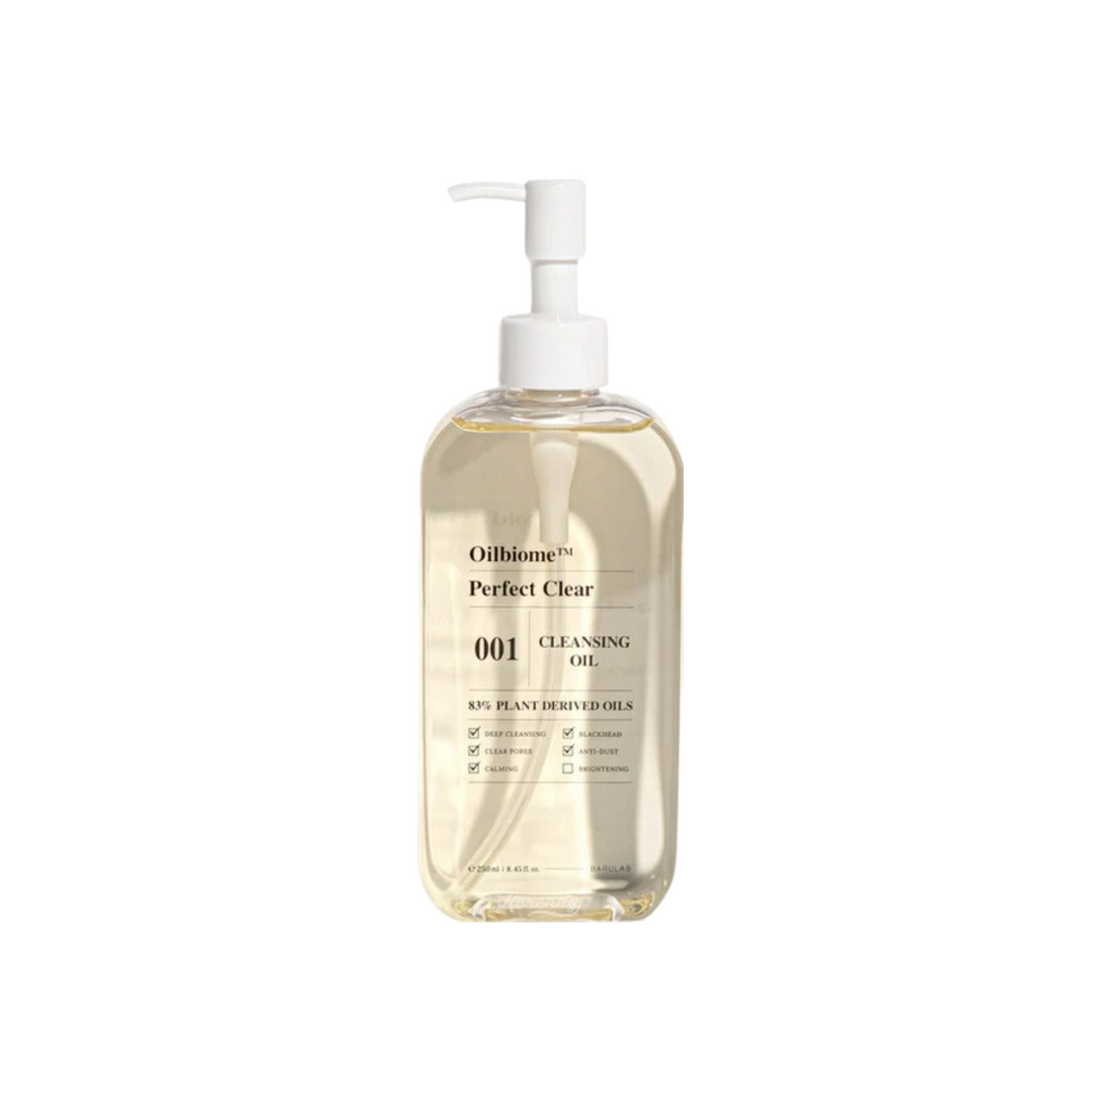 Barulab Oilbiome Perfect Clear Cleansing Oil